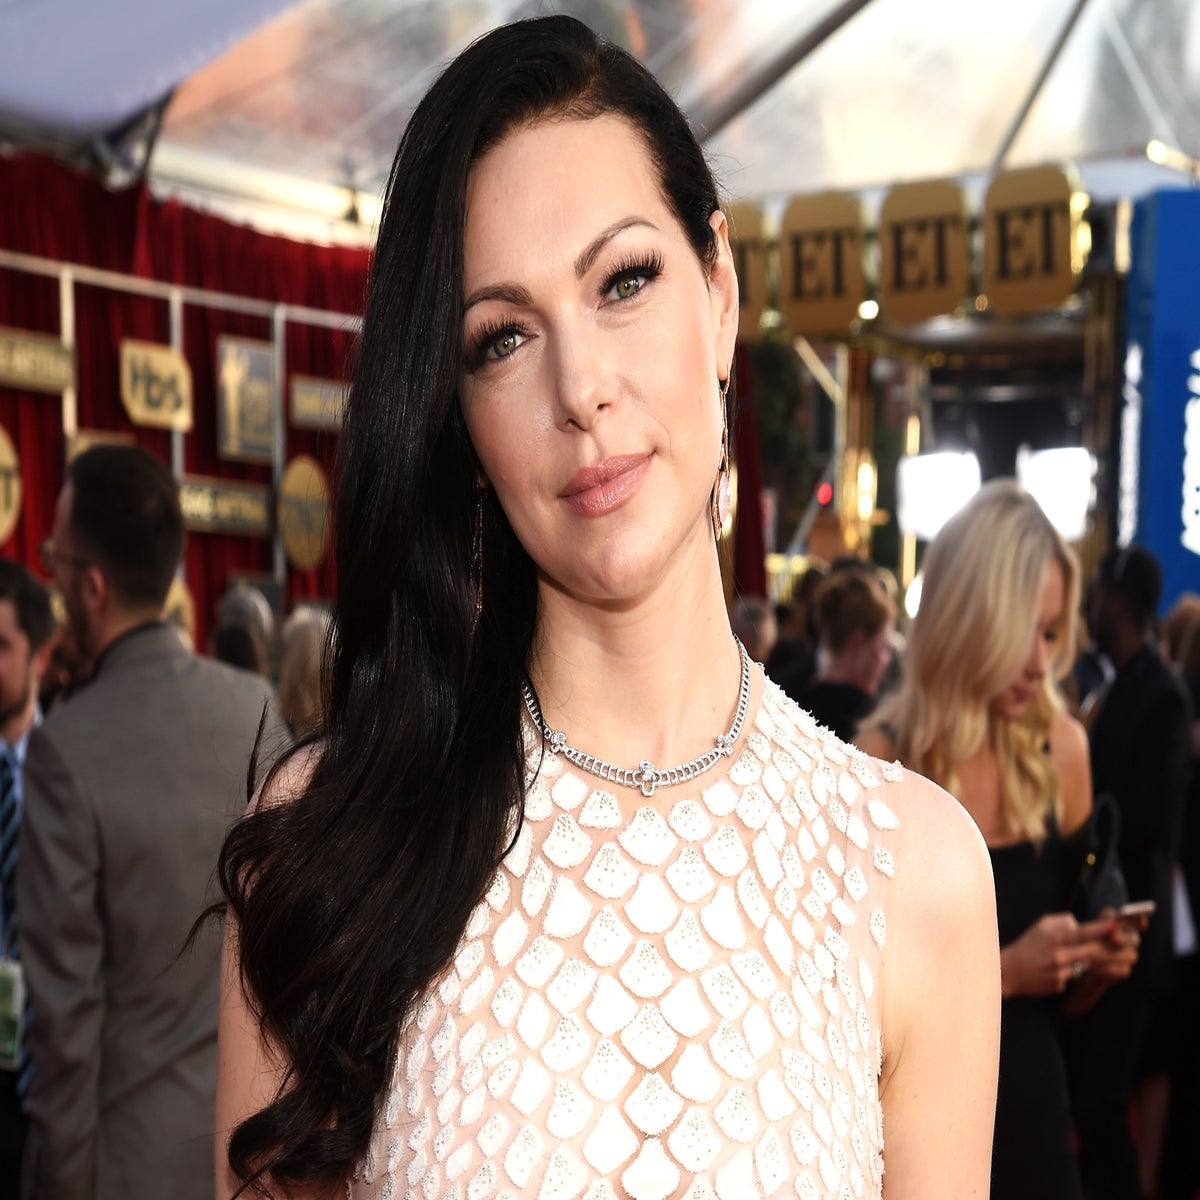 Laura Prepon Celebrity Homemade Sex - Orange is the New Black star Laura Prepon says she has left Scientology |  The Independent